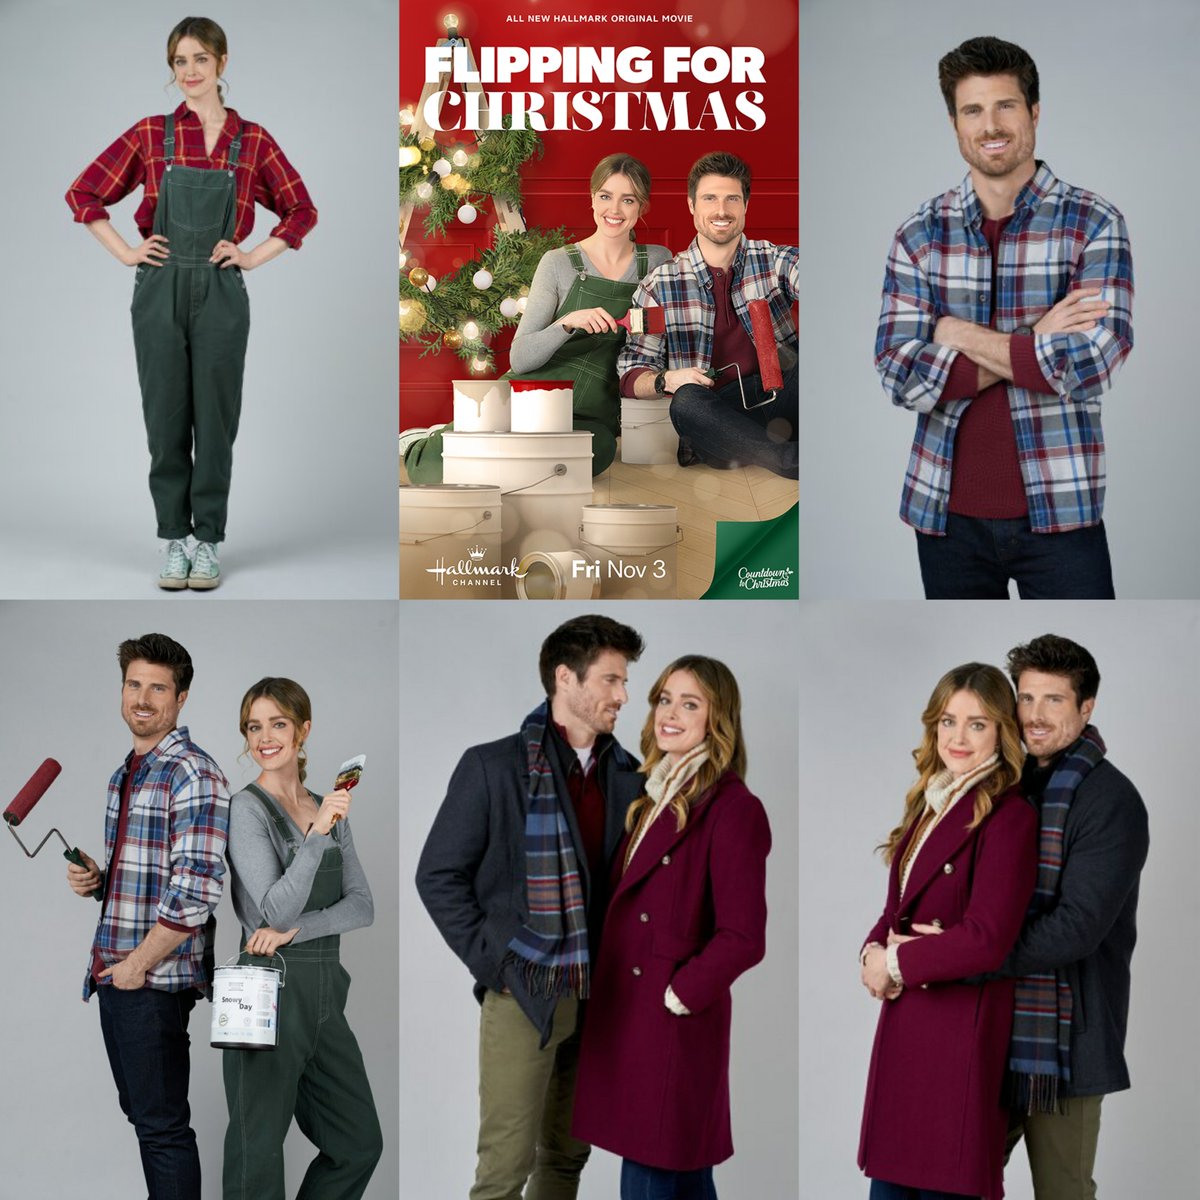 Flipping For Christmas starring Ashley Newbrough and Marcus Rosner premieres on Hallmark Channel right now🎄🎅🌟❤💚 #FlippingForChristmas 📸 Hallmark Media